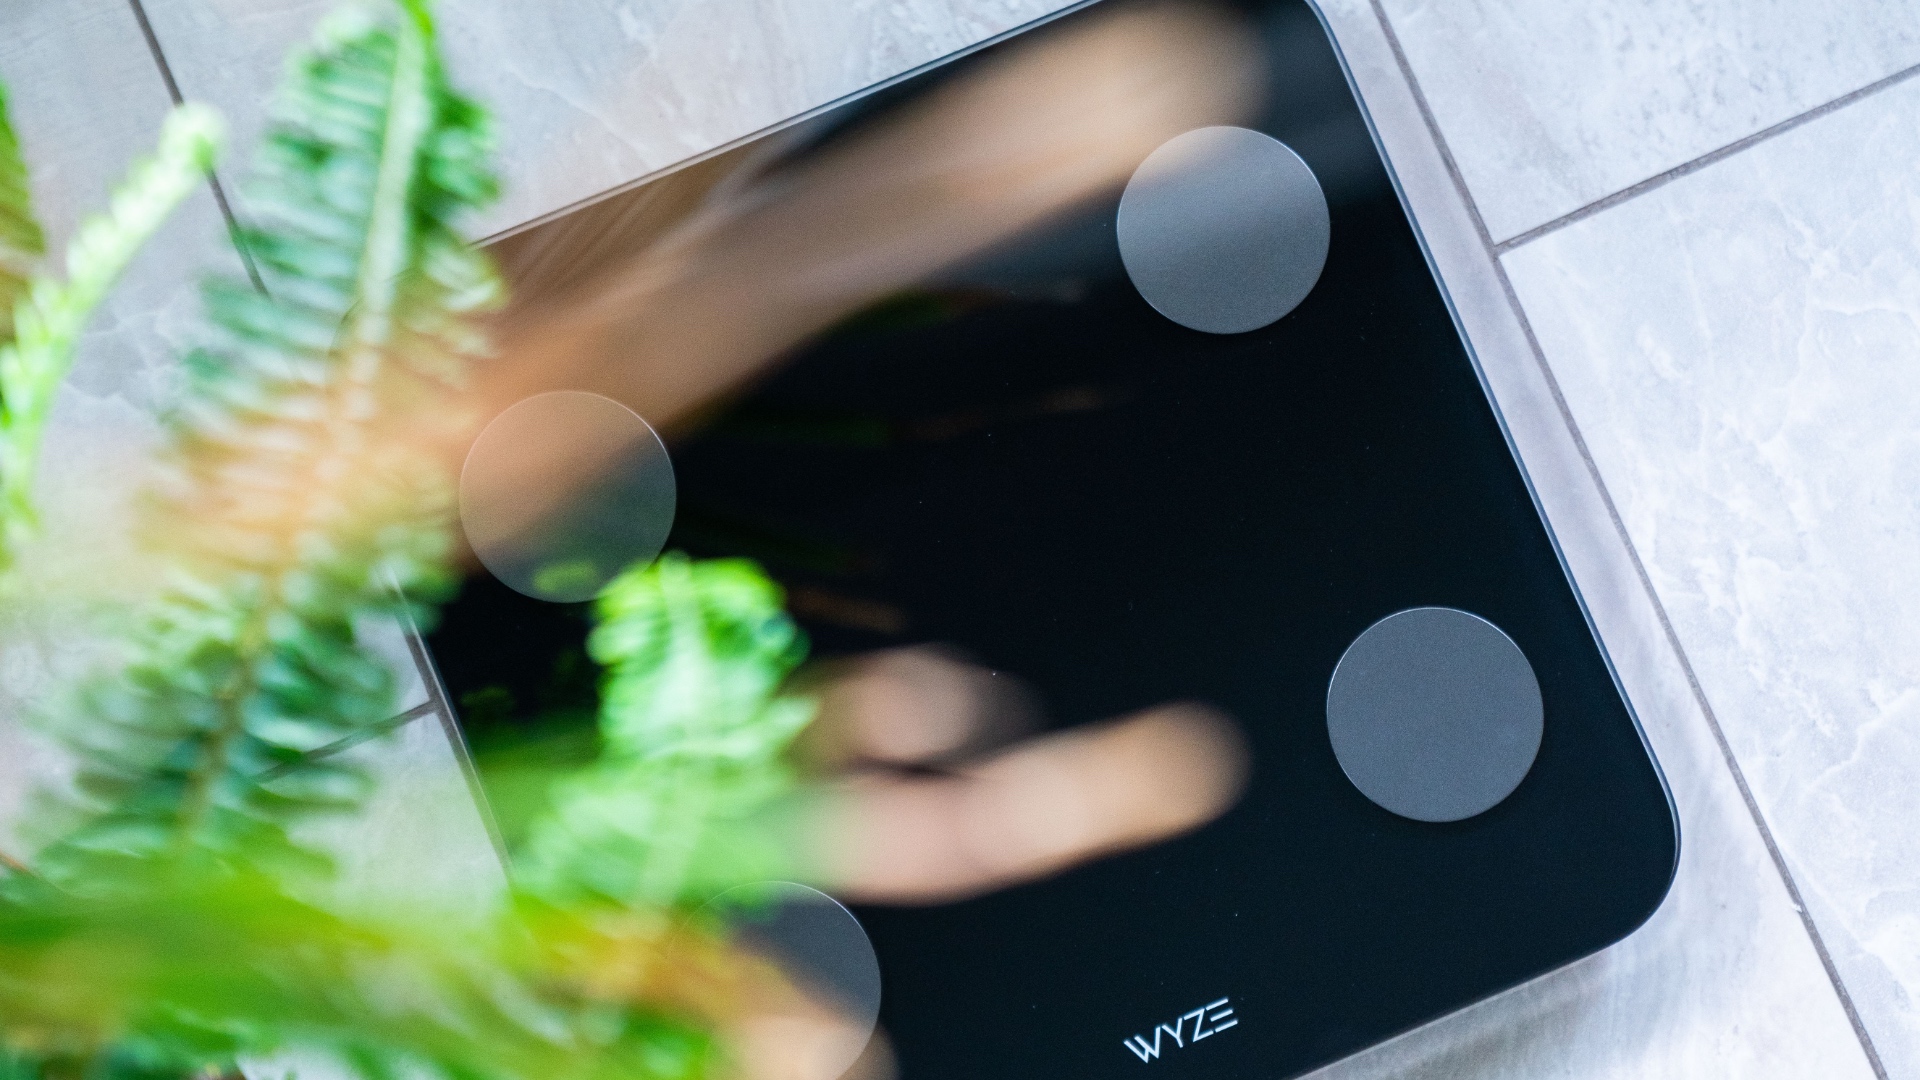 The Wyze Scale S costs just $15, making it one of the cheapest